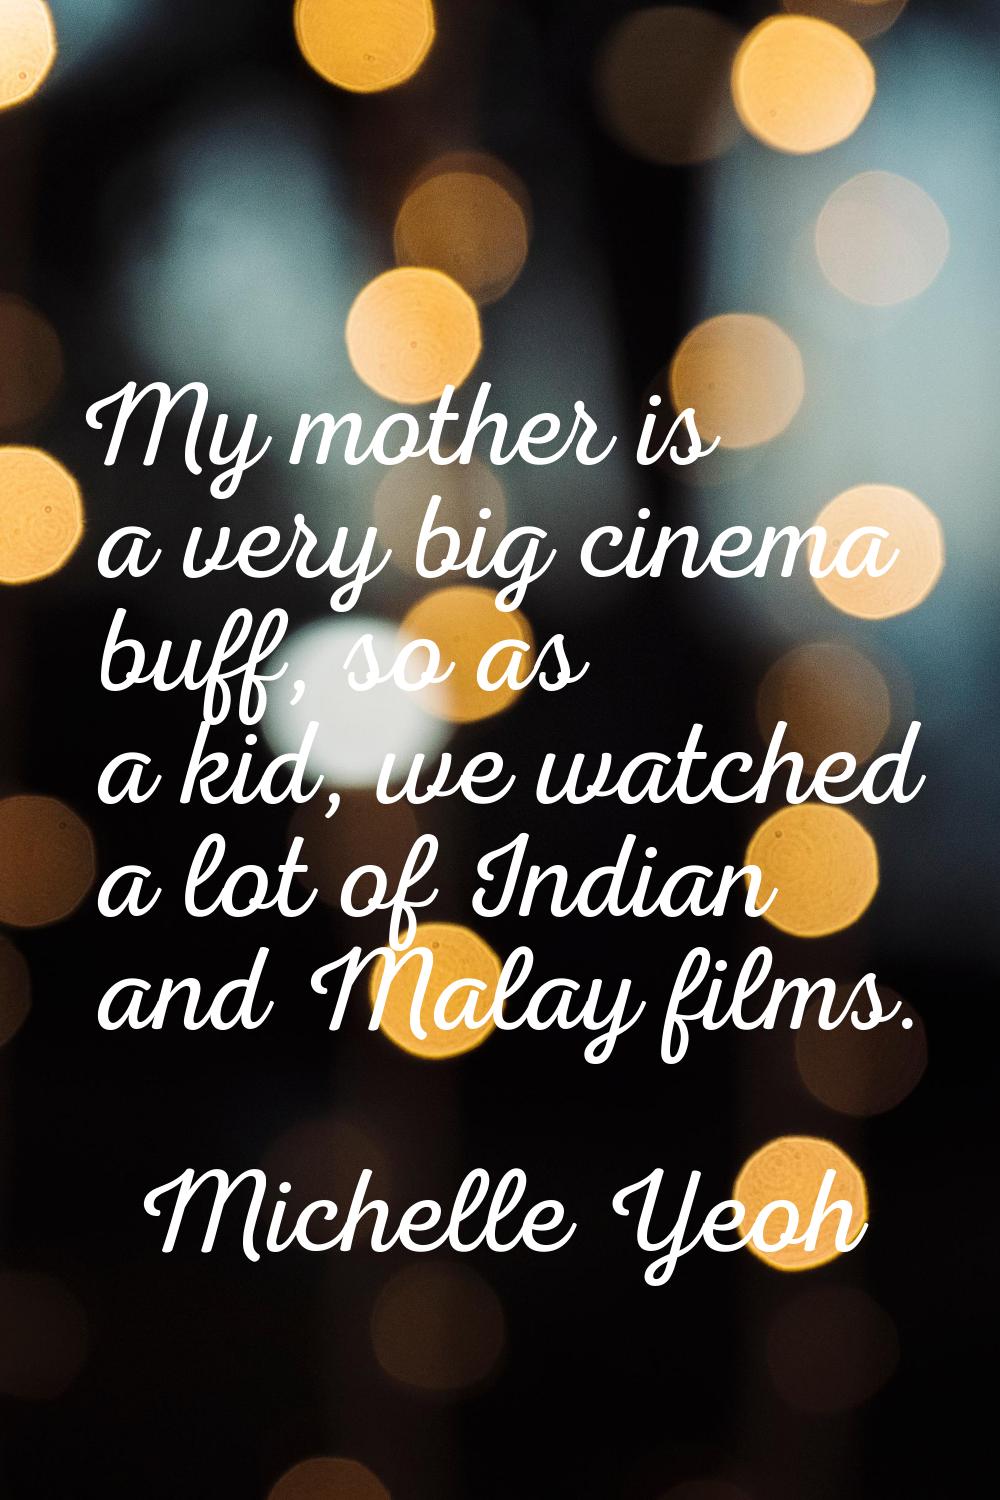 My mother is a very big cinema buff, so as a kid, we watched a lot of Indian and Malay films.